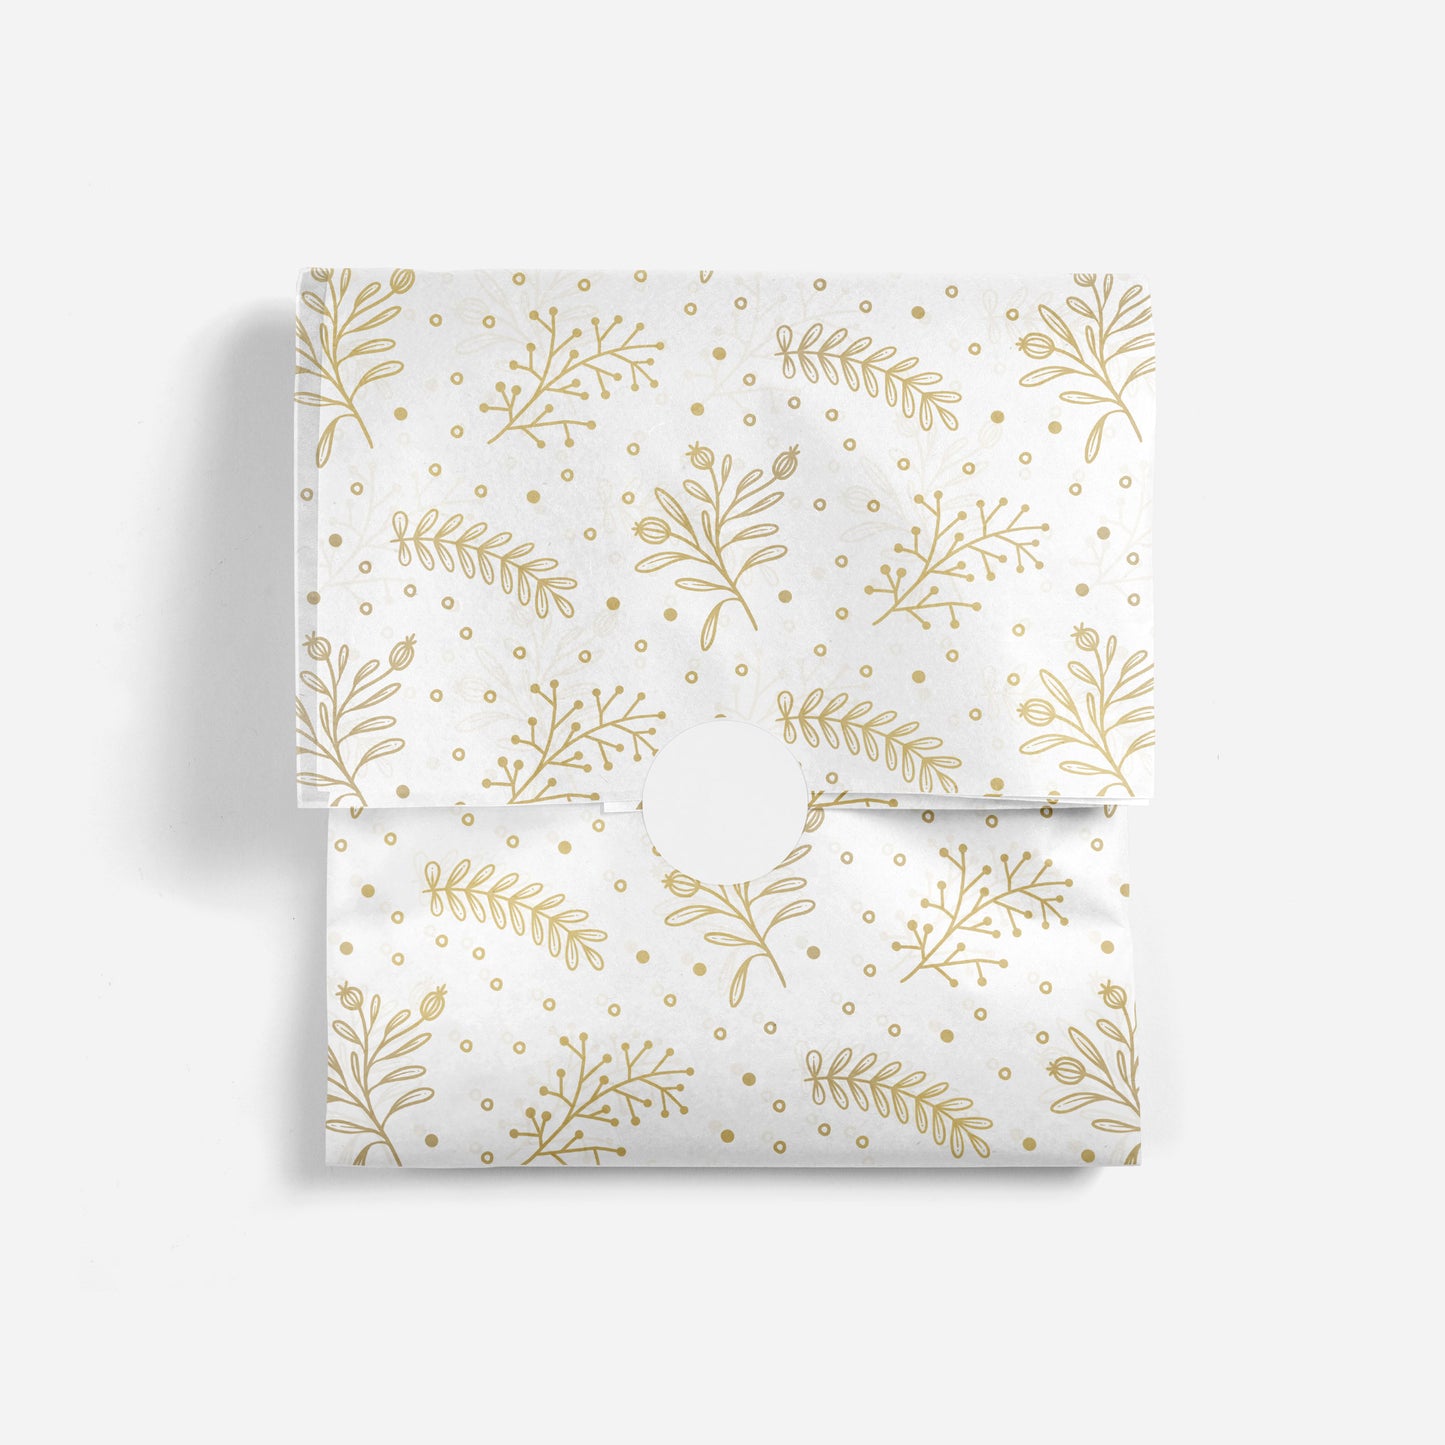 Gold Marbled White Floral Wrapping Paper - 20 Sheets